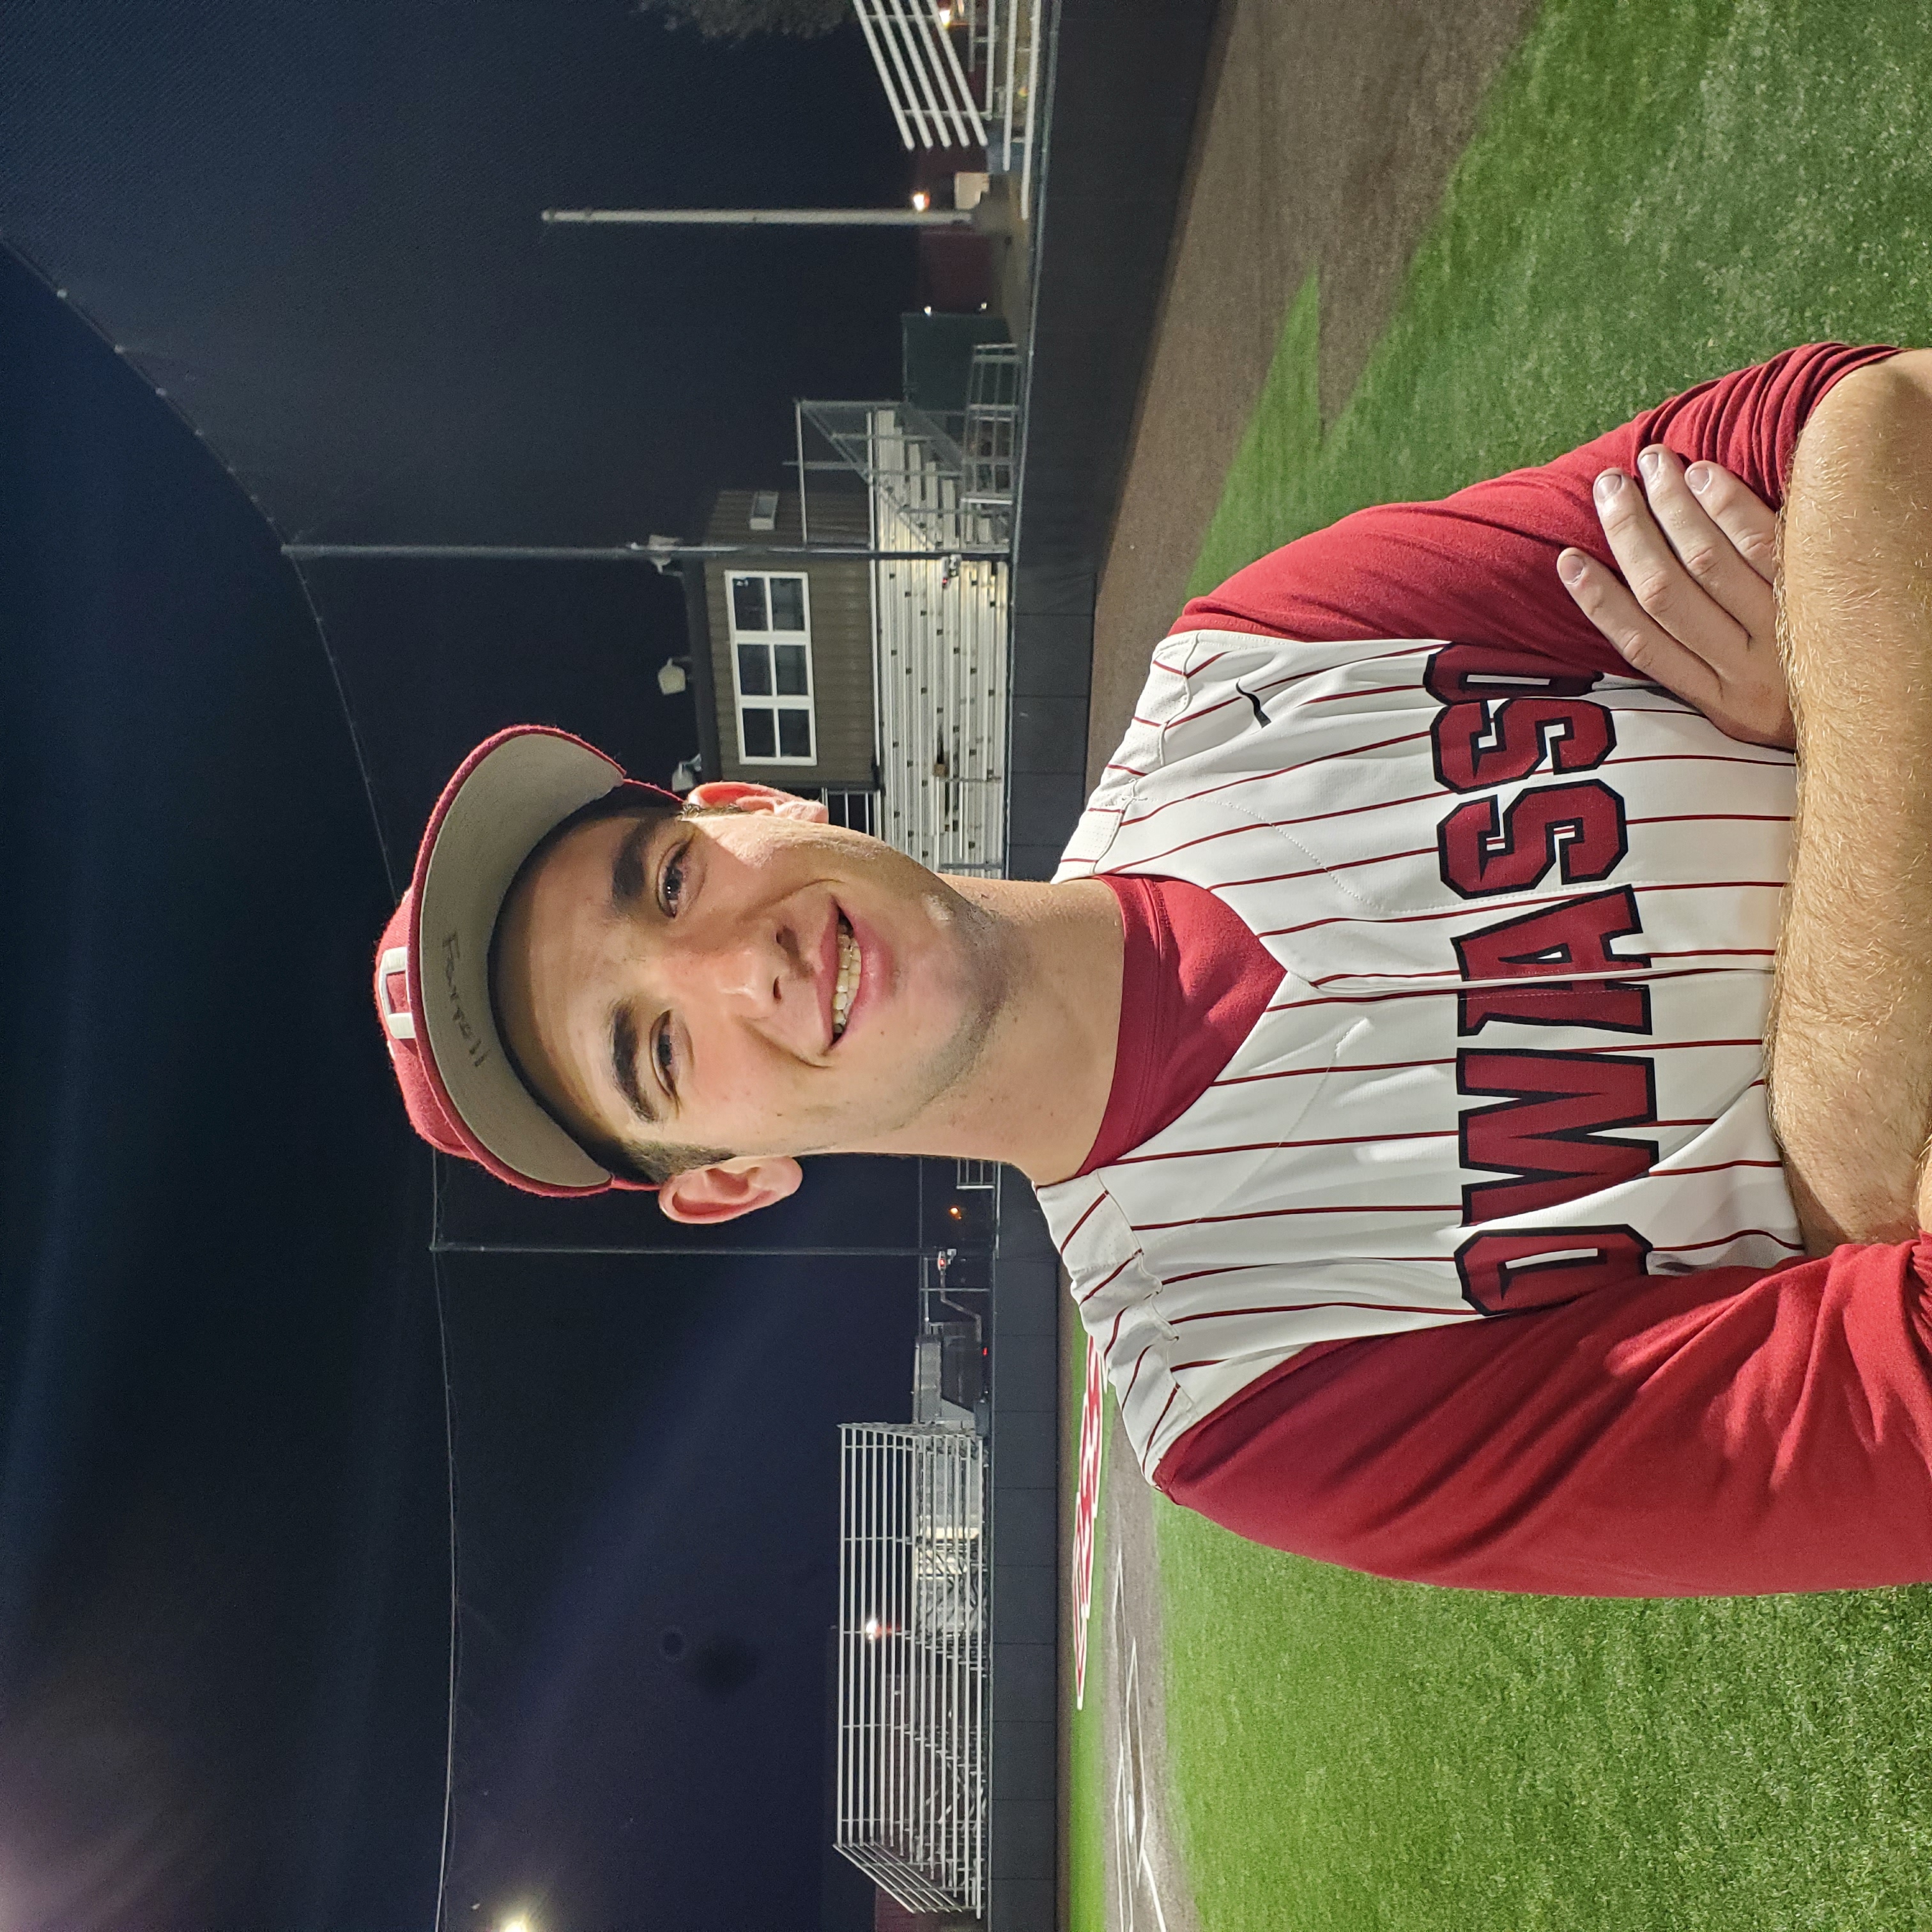 Owasso pitcher Jackson Farrell threw a one-hitter, allowed two unearned runs, and delivered 10 strikeouts Monday night against Putnam City North.